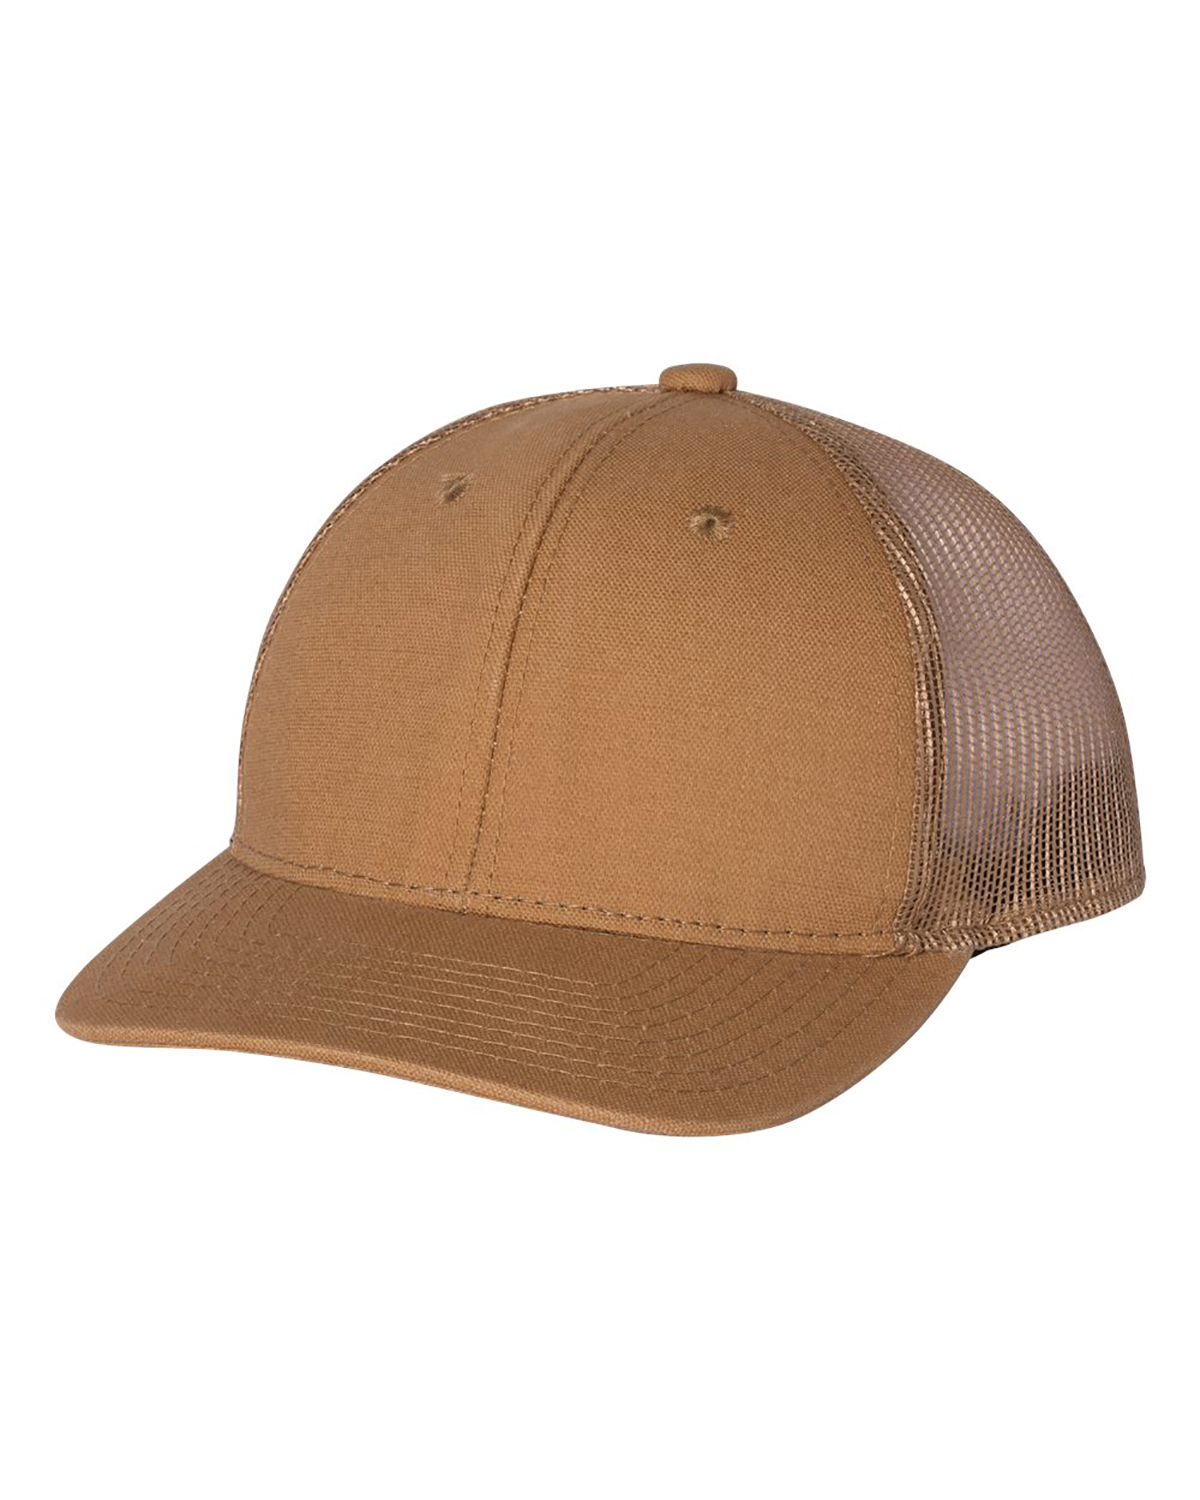 'Outdoor Cap HPK100 Canvas Cap with Weathered Cotton Visor'